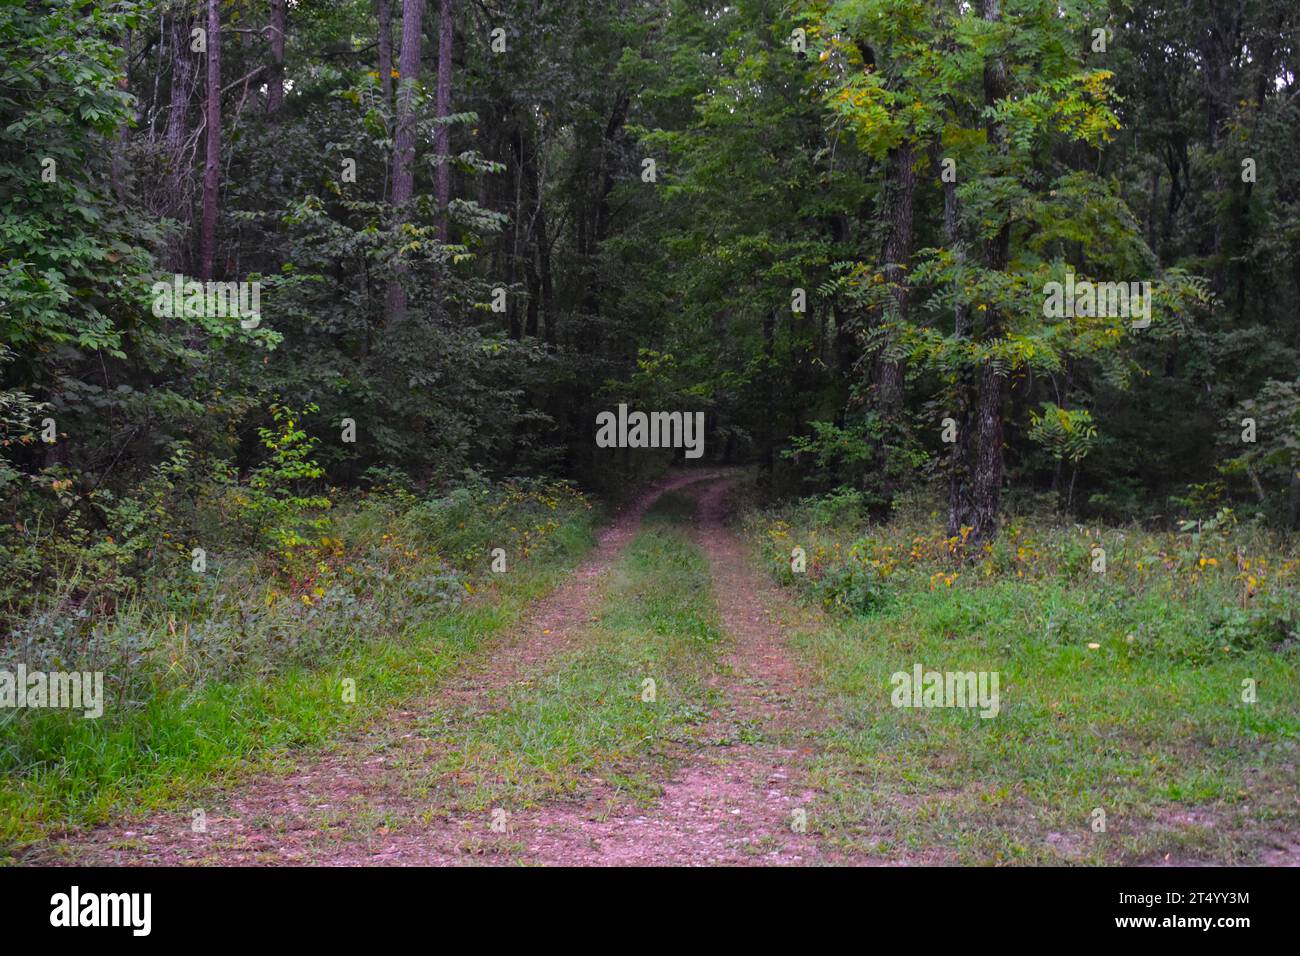 A country road disappears into the woods on forestry land.  The road less traveled. Stock Photo